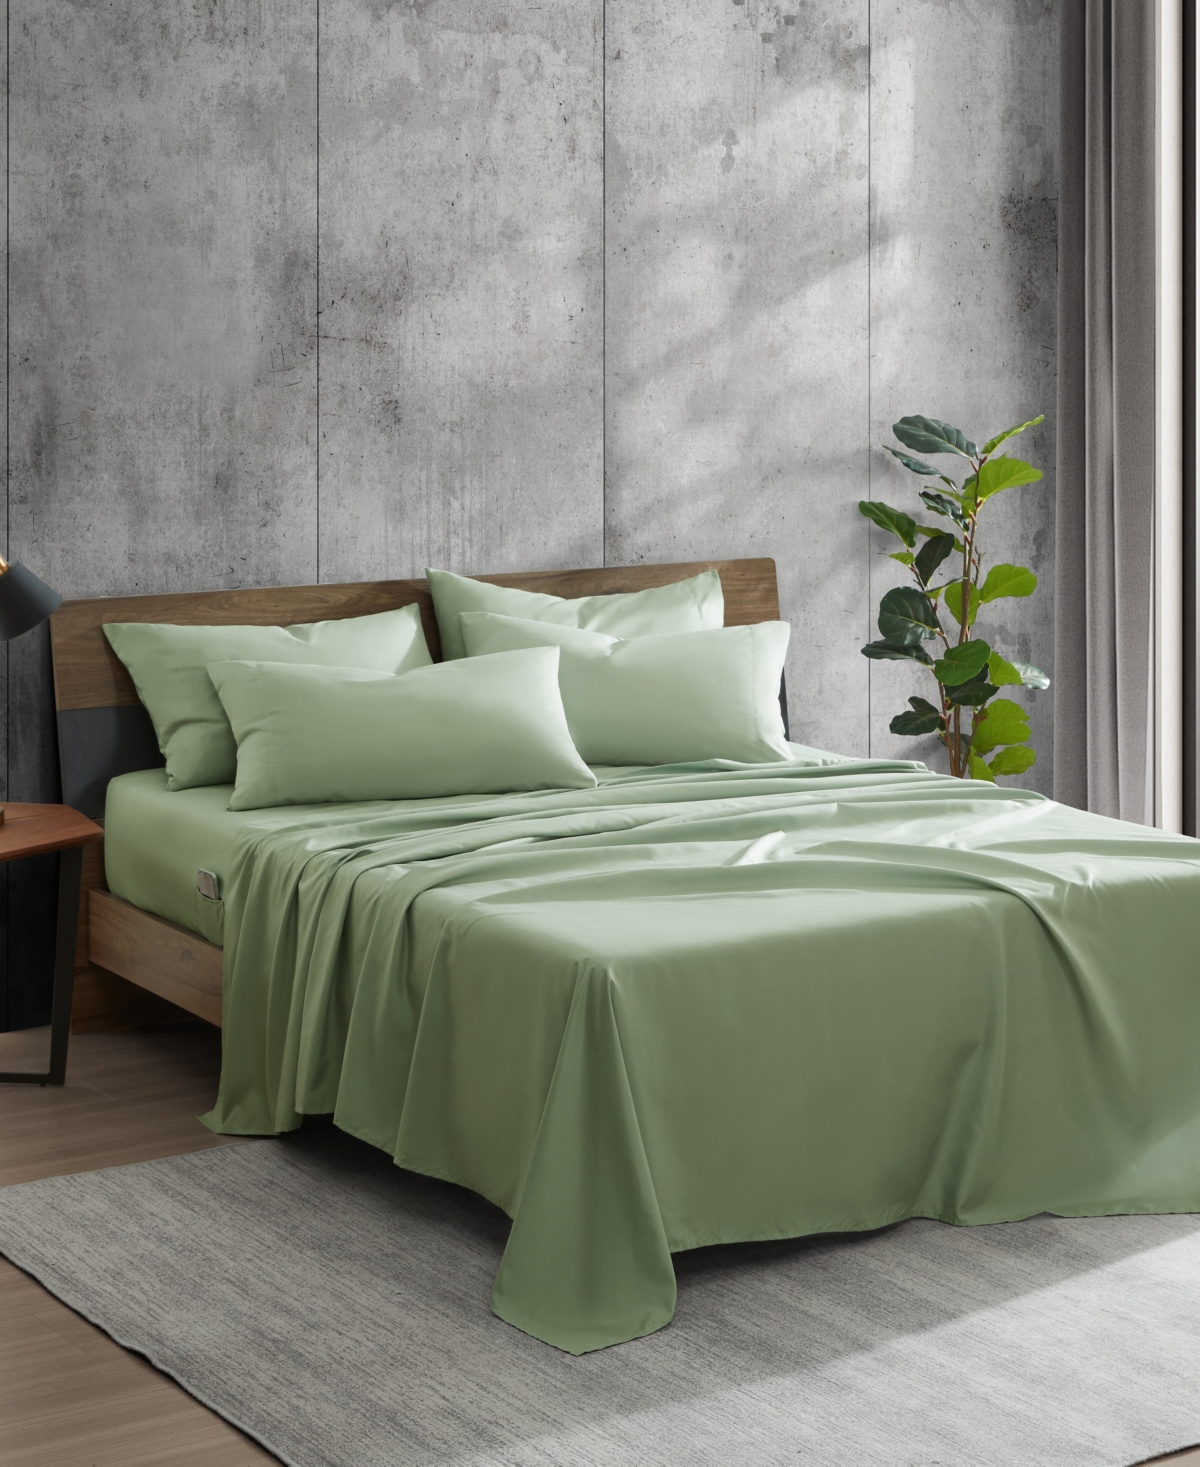 Kenneth Cole New York Solution Solid Microfiber 6 Piece Sheet Set, Queen In Sage Green